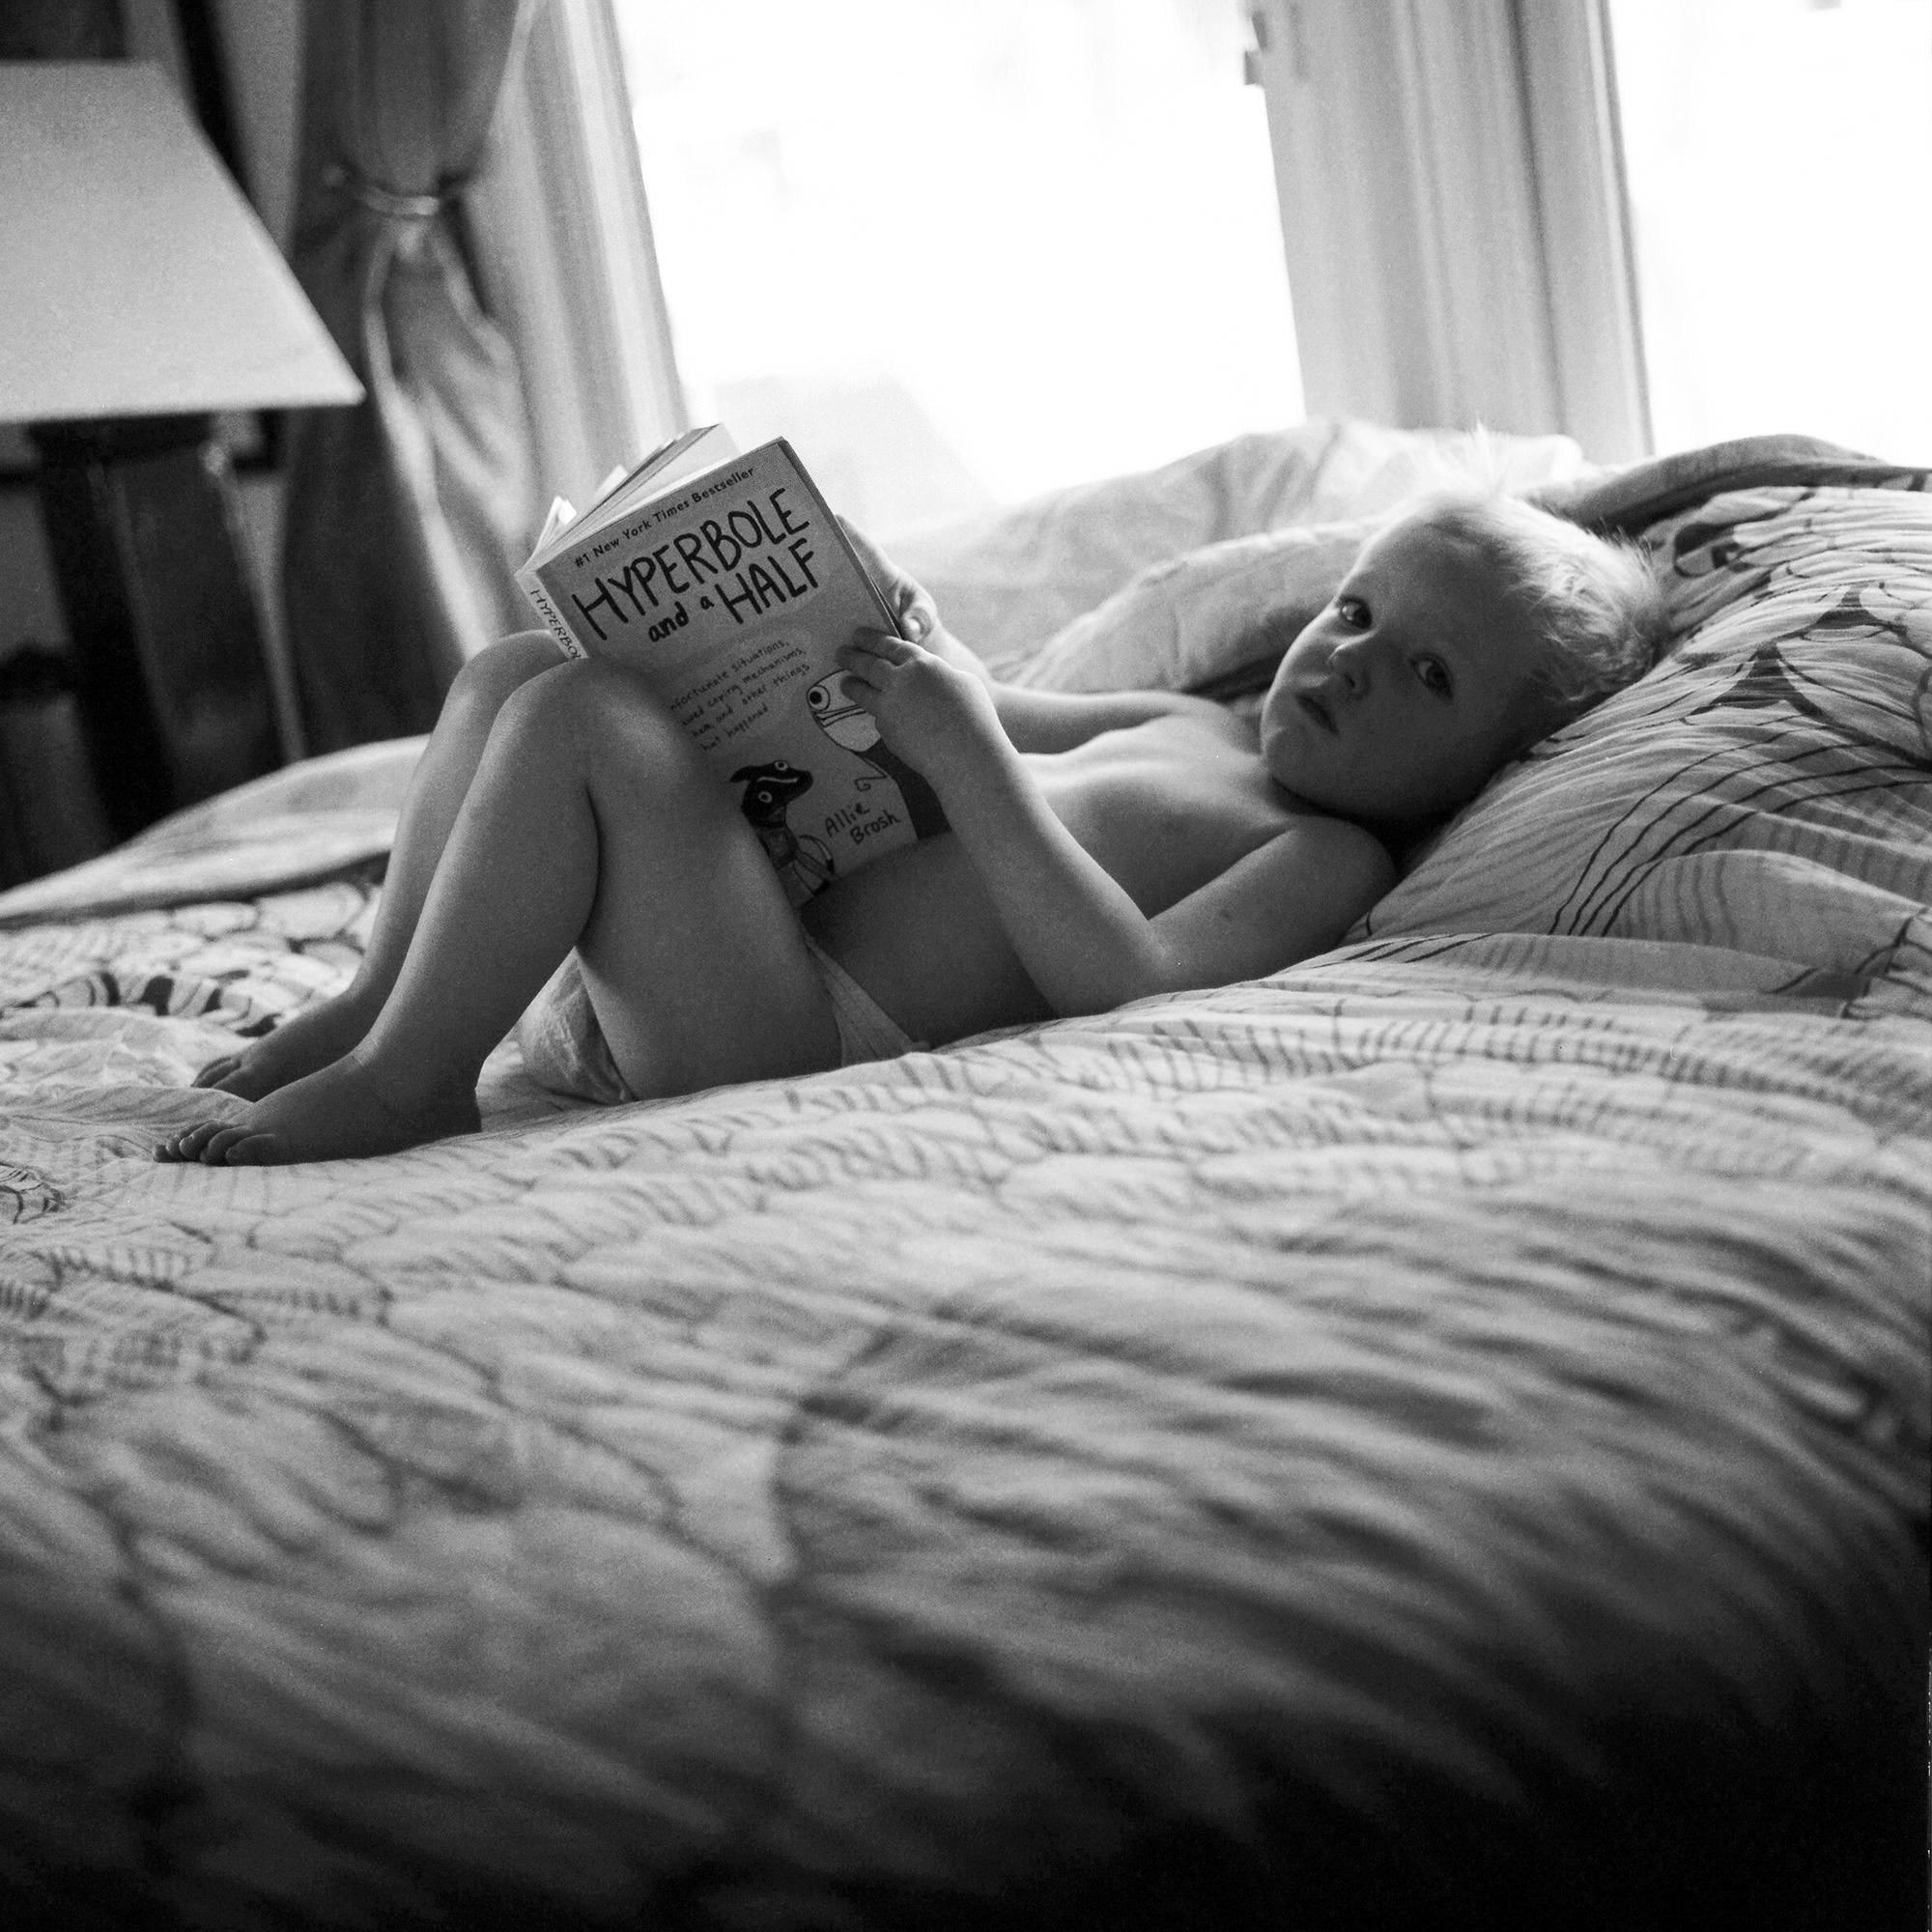 black and white film photograph of a boy reading a book on a bed